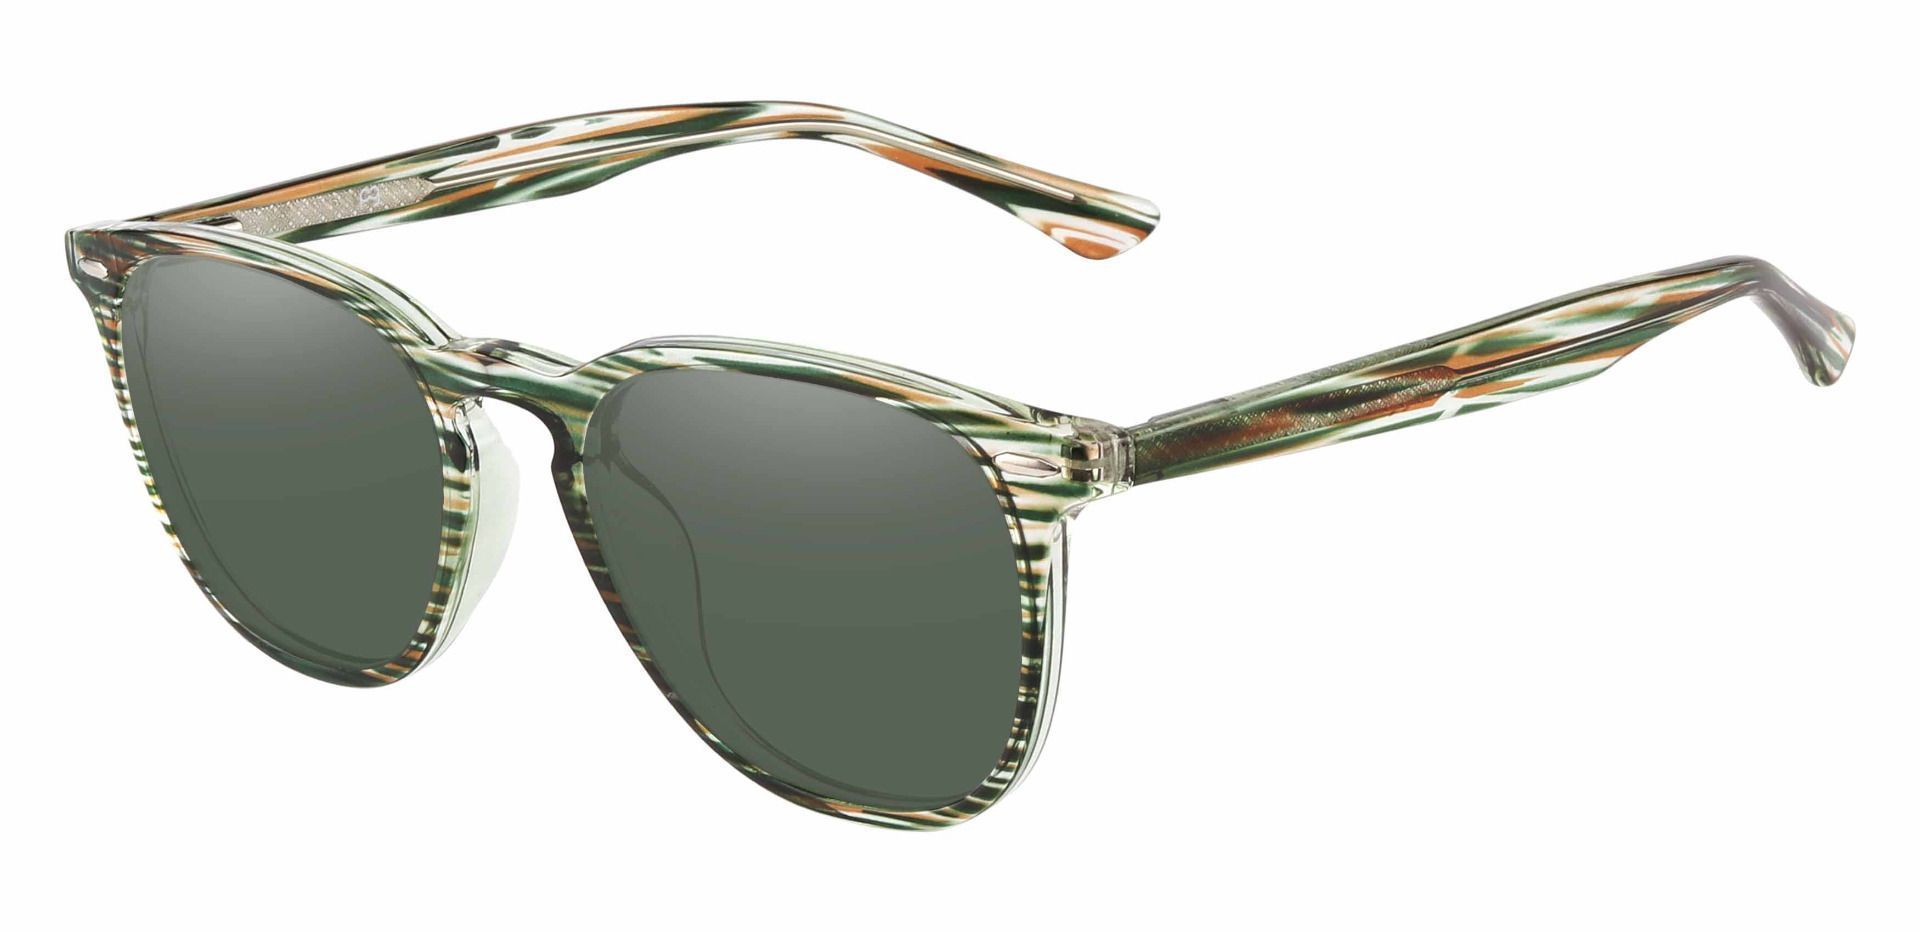 Sycamore Oval Progressive Sunglasses - Green Frame With Green Lenses